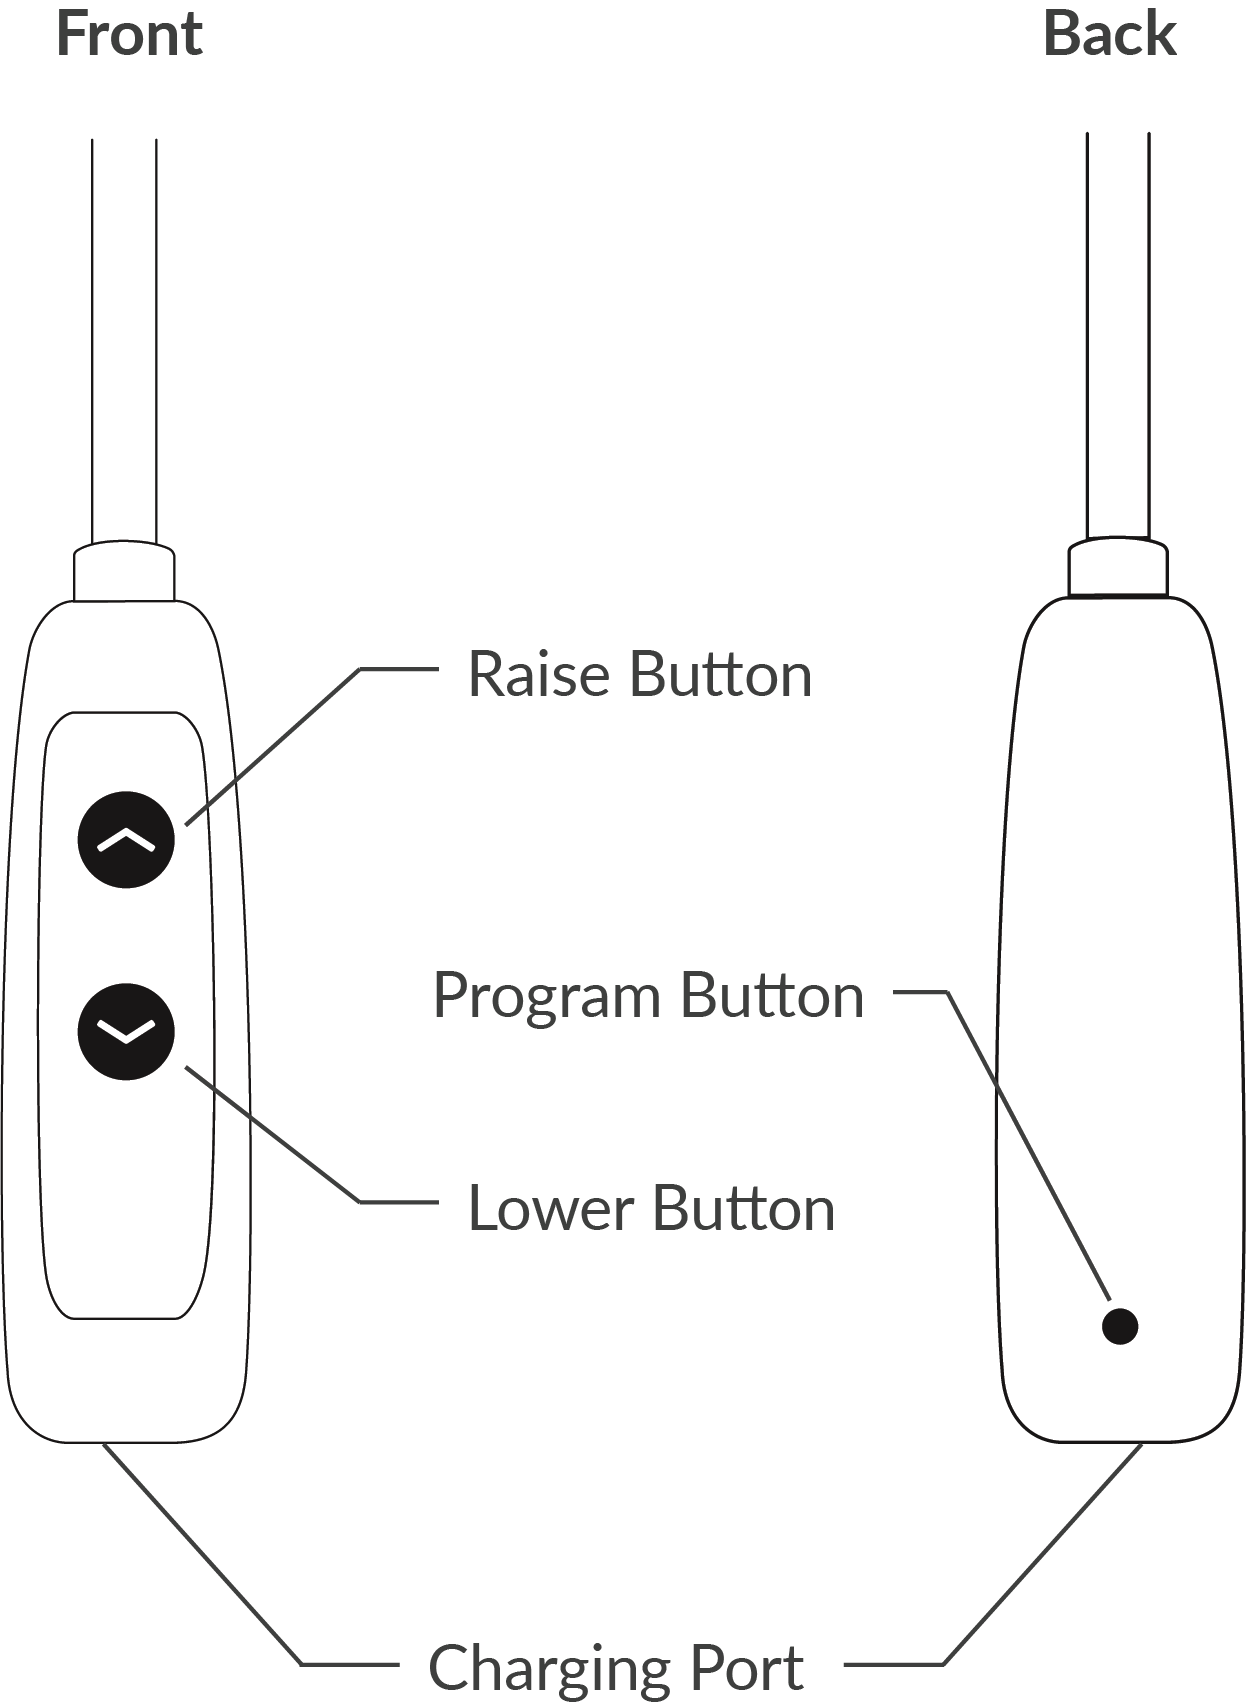 Illustration of a quick press wand